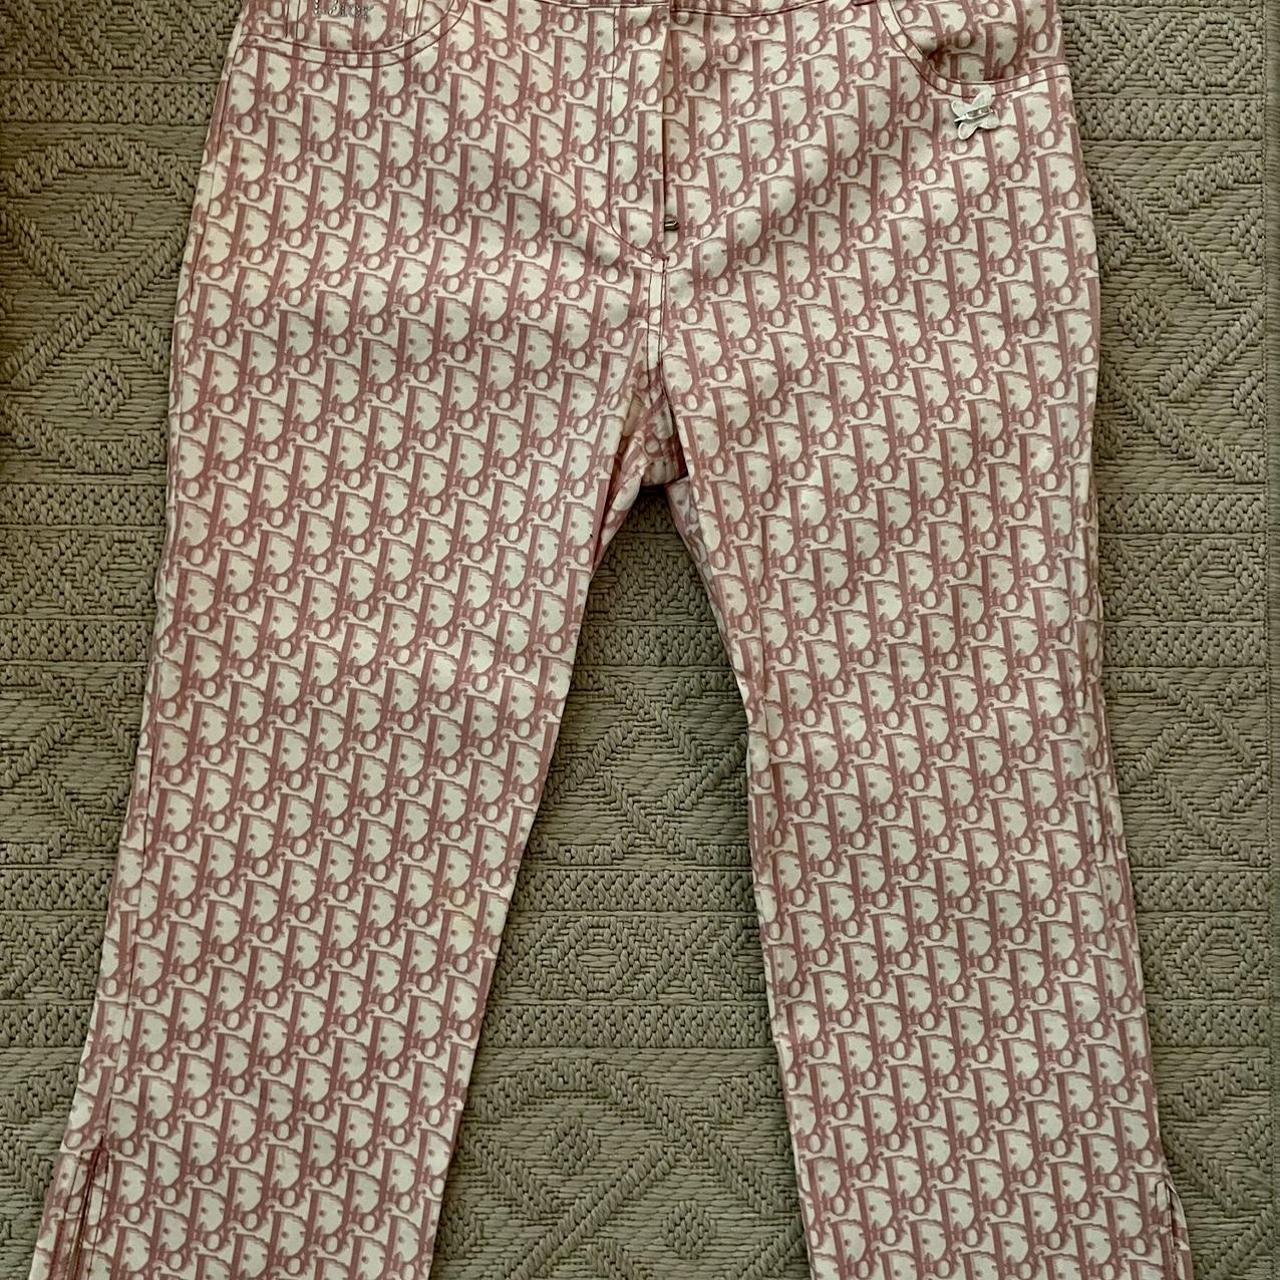 Christian Dior Women's White and Pink Trousers | Depop